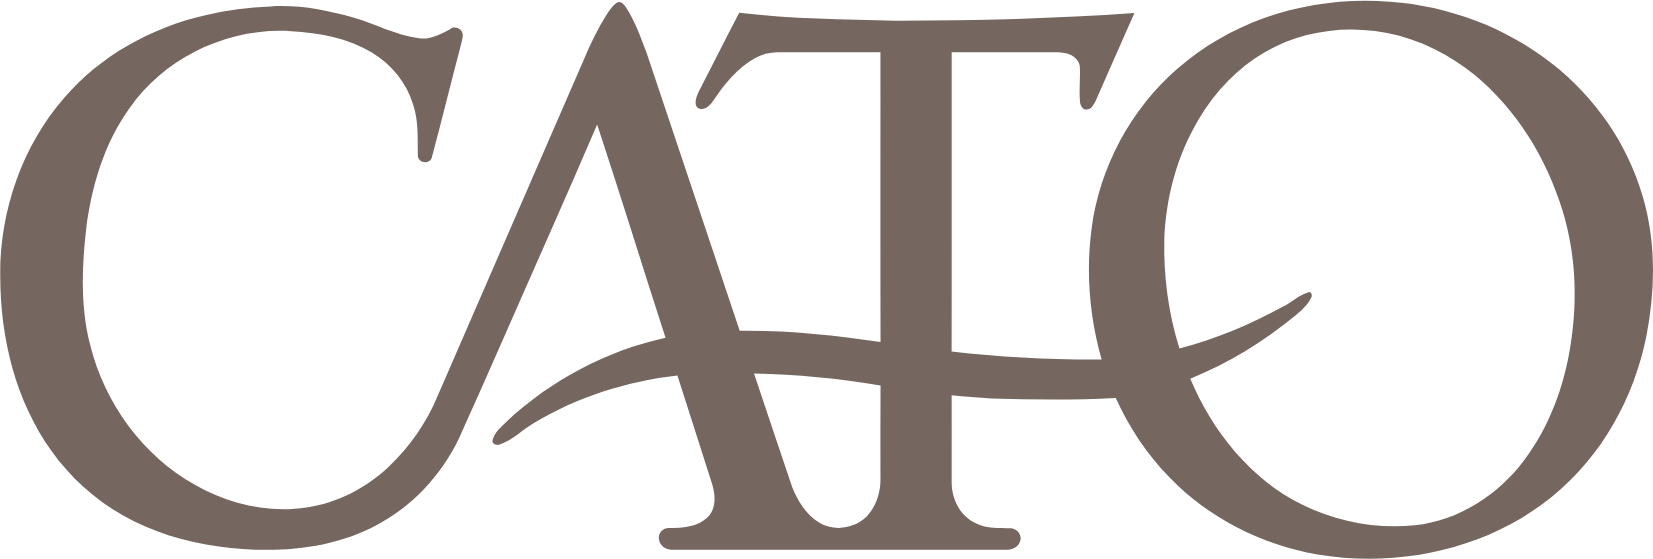 Cato Fashion logo in transparent PNG and vectorized SVG formats